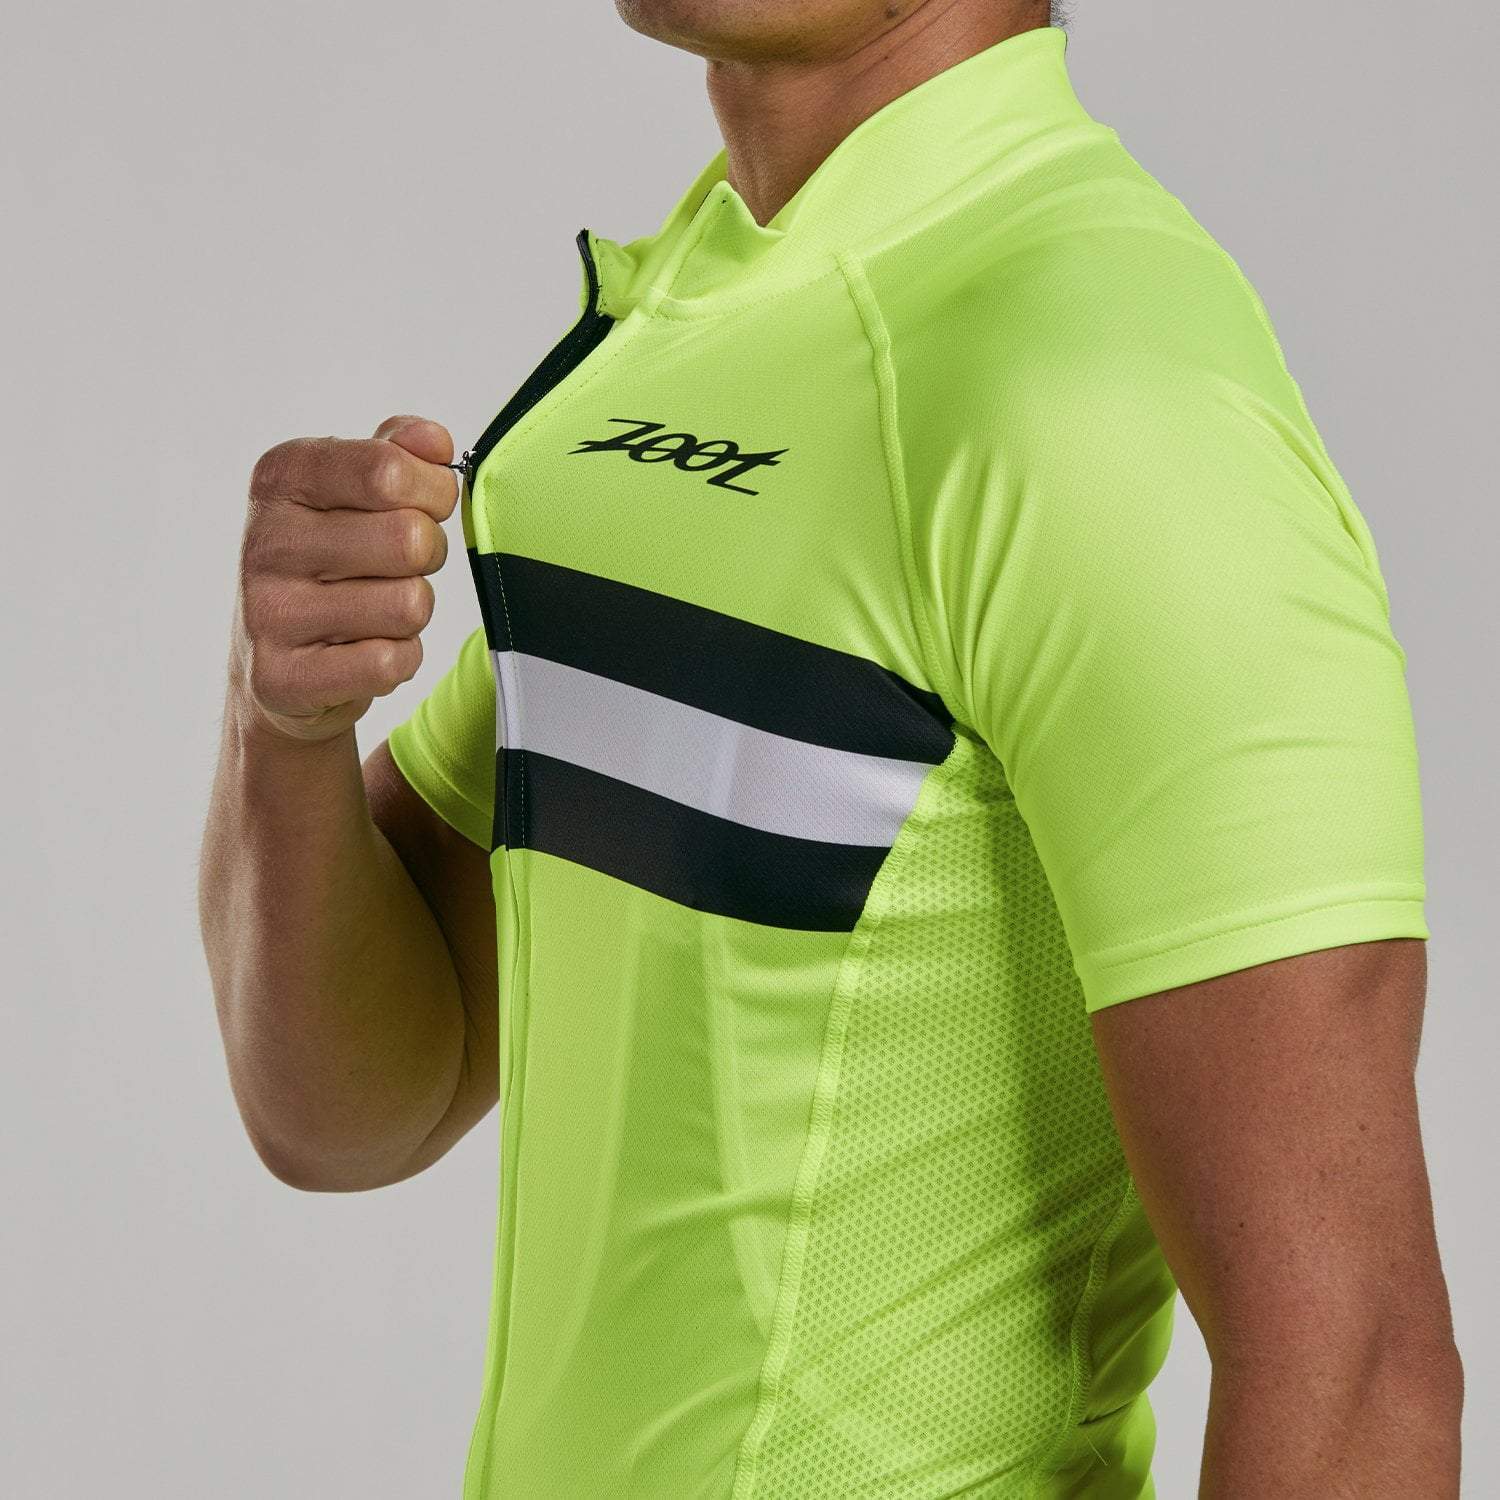 Zoot Sports CYCLE APPAREL MENS CORE + CYCLE JERSEY - SAFETY YELLOW